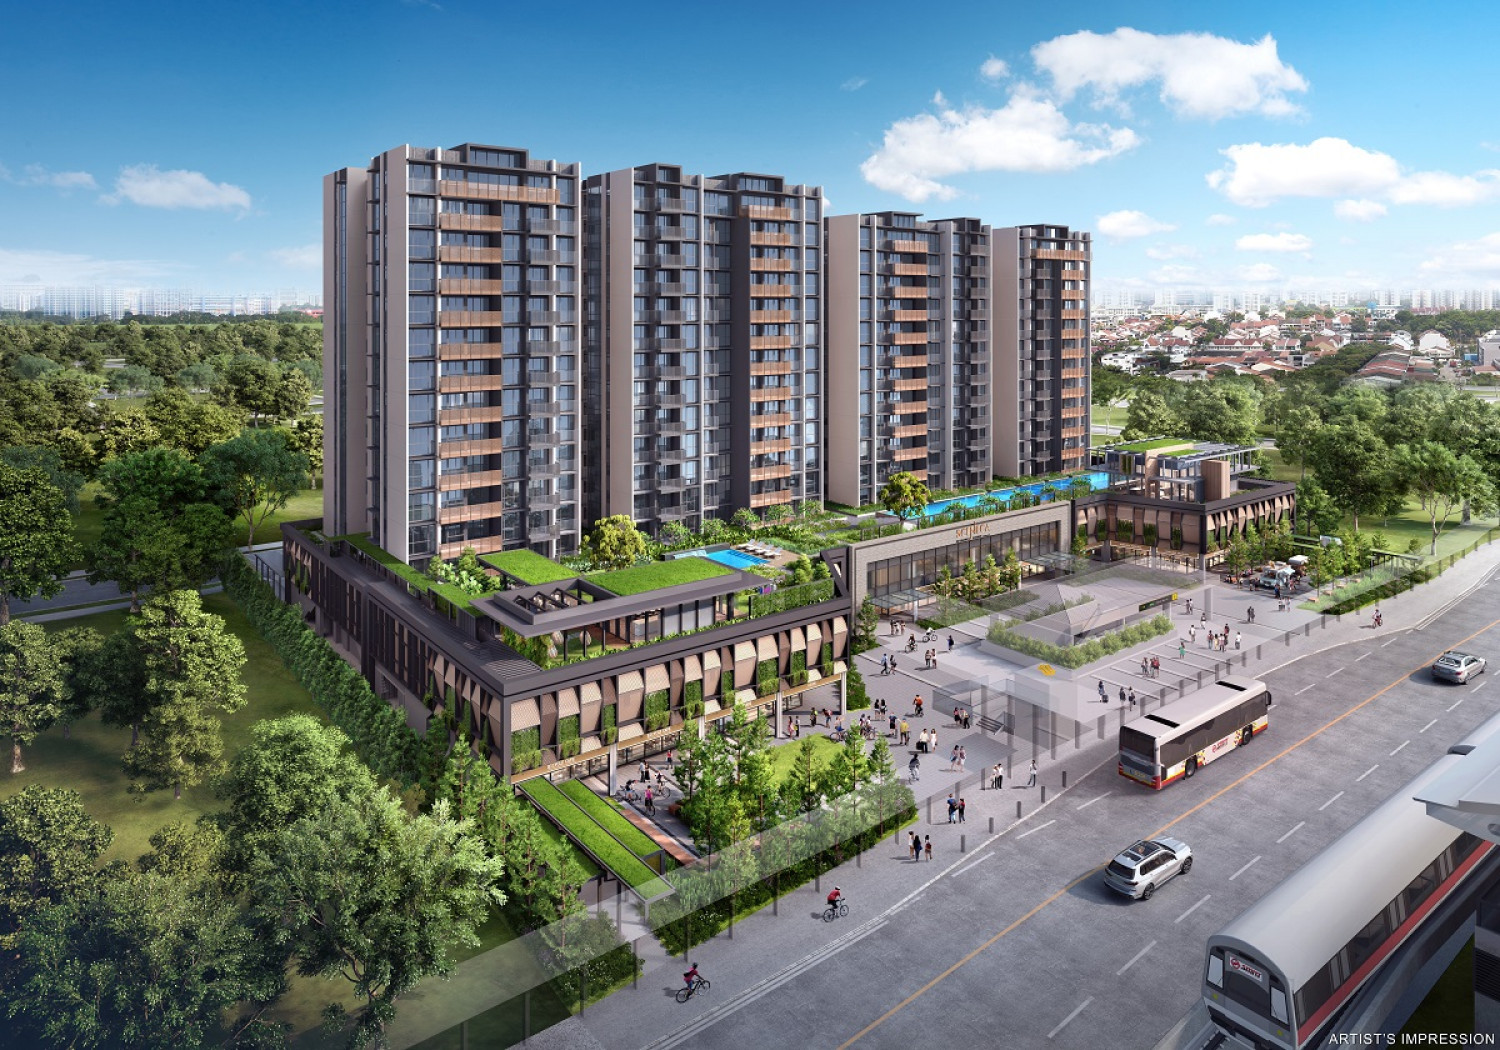 MCC Land runs ‘one price’ promotion for select units at Sceneca Residence, saving up to $144,000 for buyers - Property News